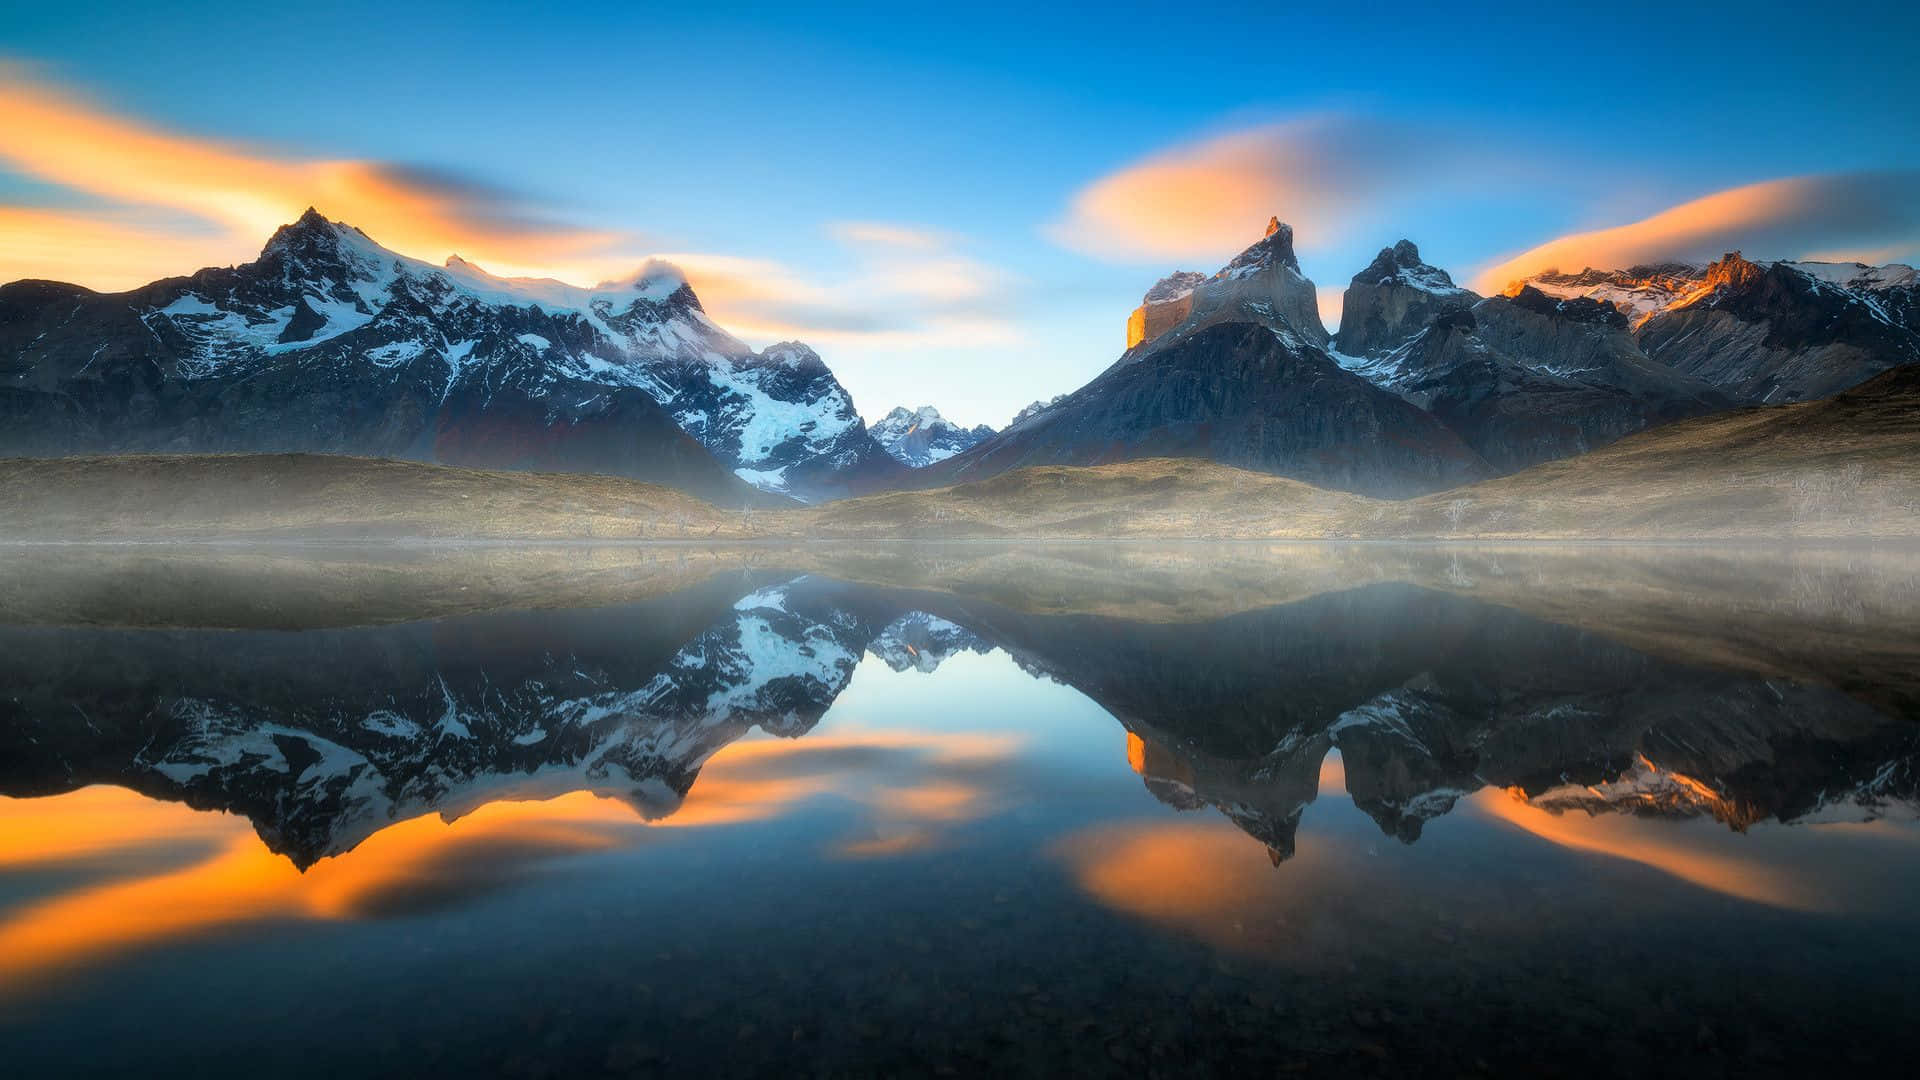 "Exploring the Beauty of Patagonia"